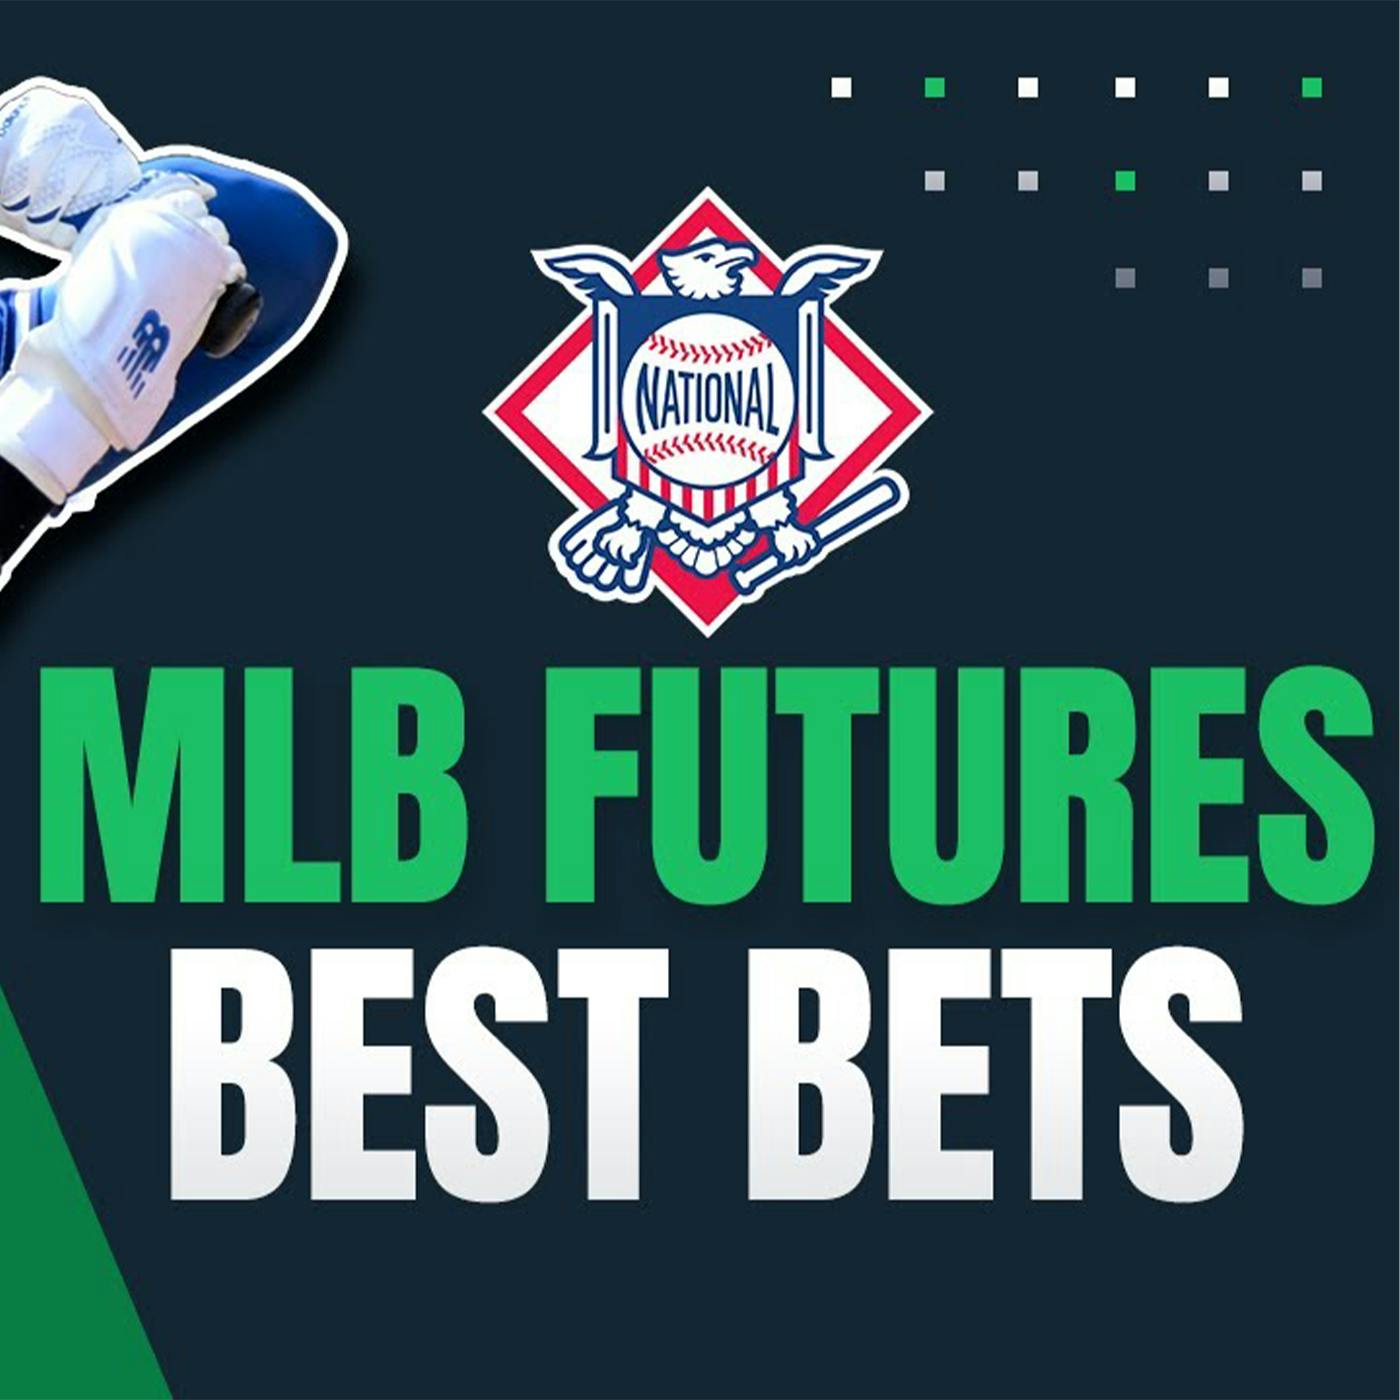 MLB Futures Picks: National League Best Bets! | The Early Edge